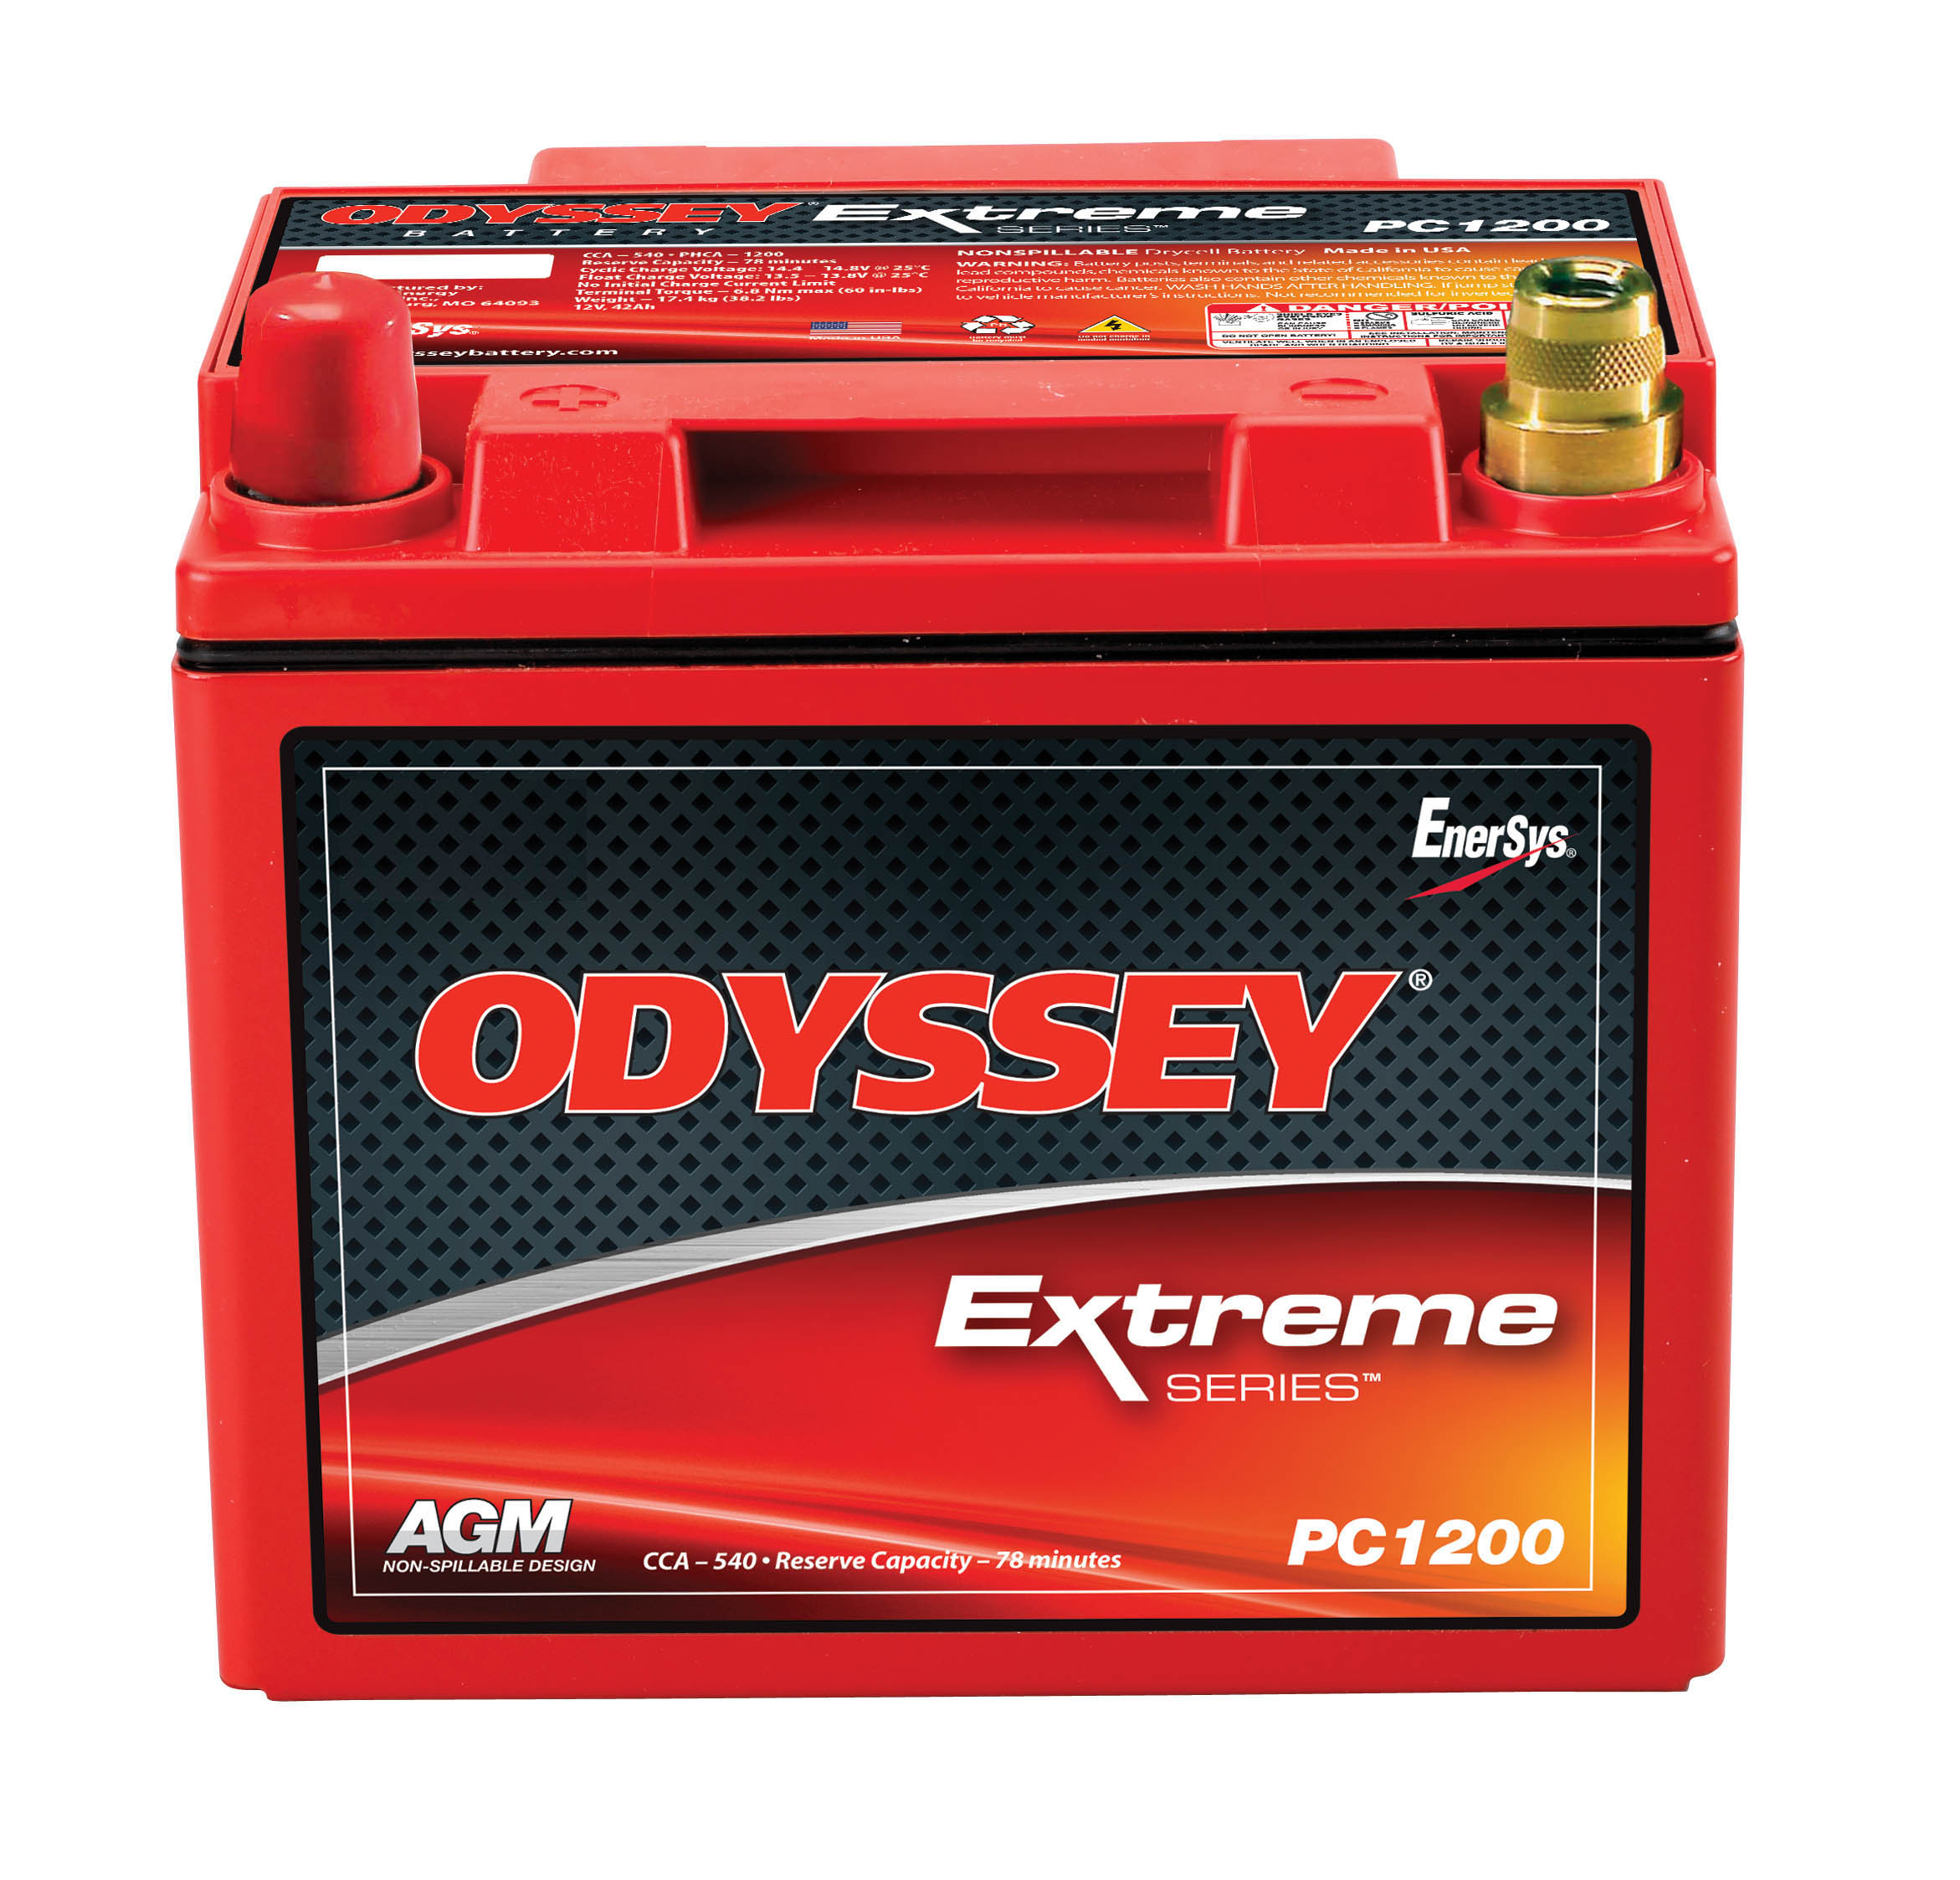 EnerSys Offers ODYSSEY Battery as an Upgrade for Polaris RZR1000